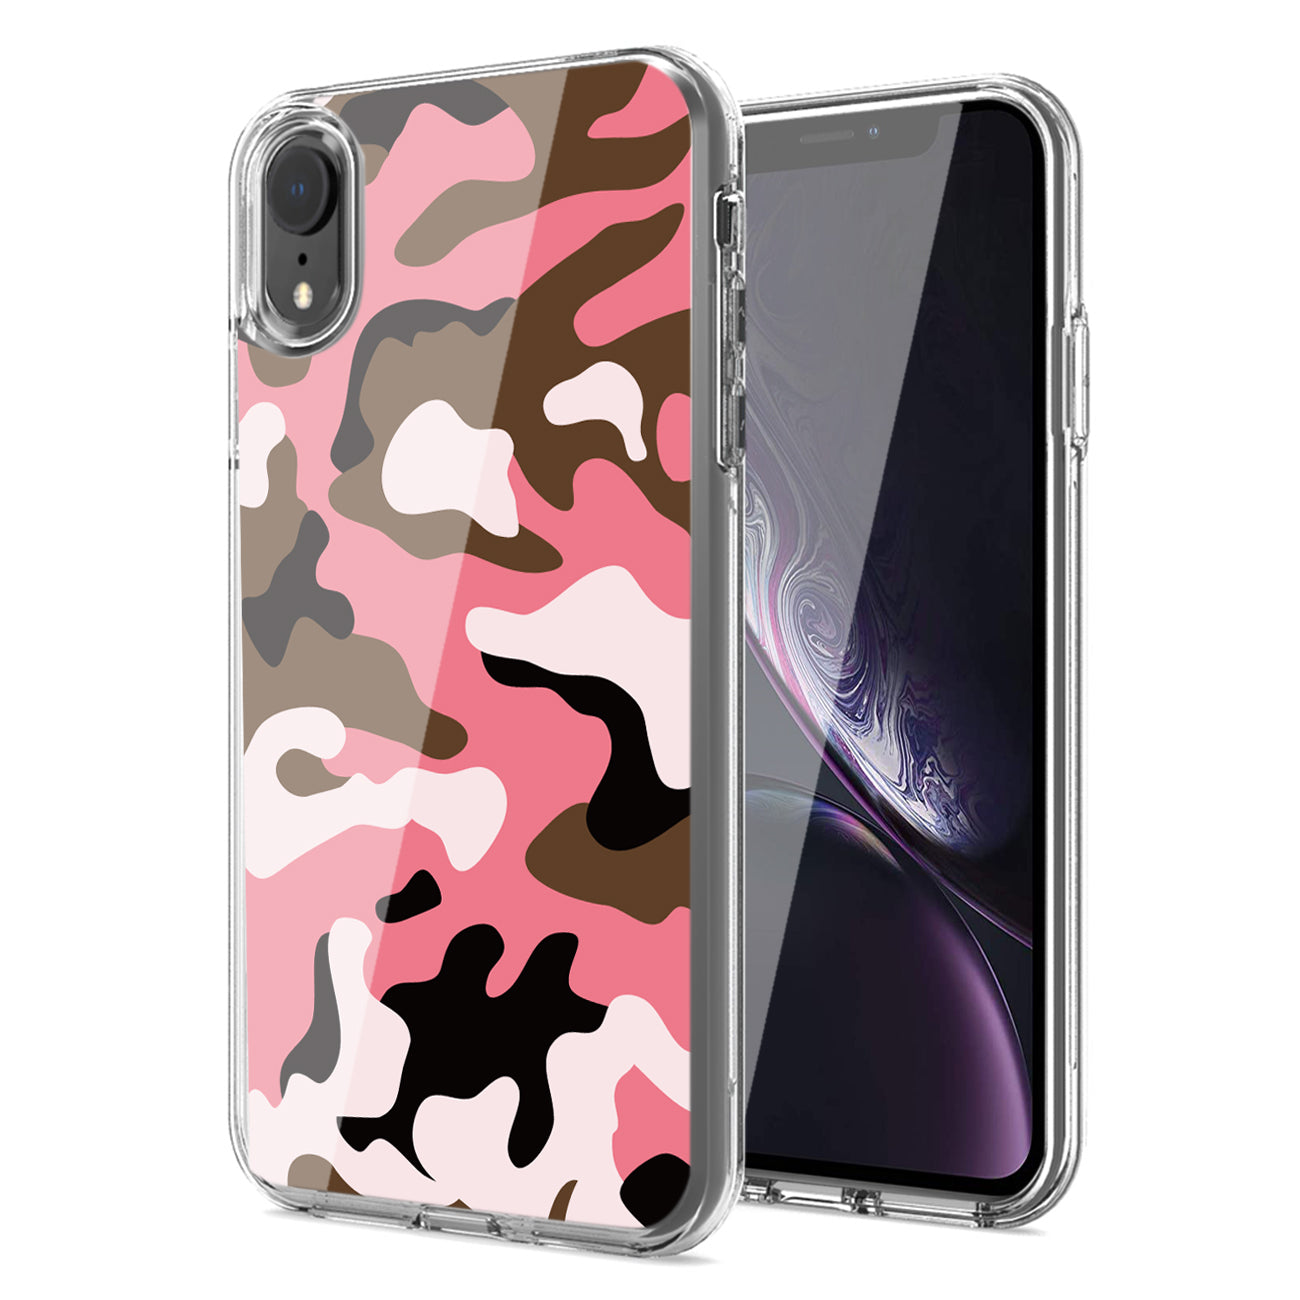 Camouflage Dual Layer Hybrid Hard Plastic and Soft TPU Rubber Case Cover for APPLE IPHONE XR In Pink